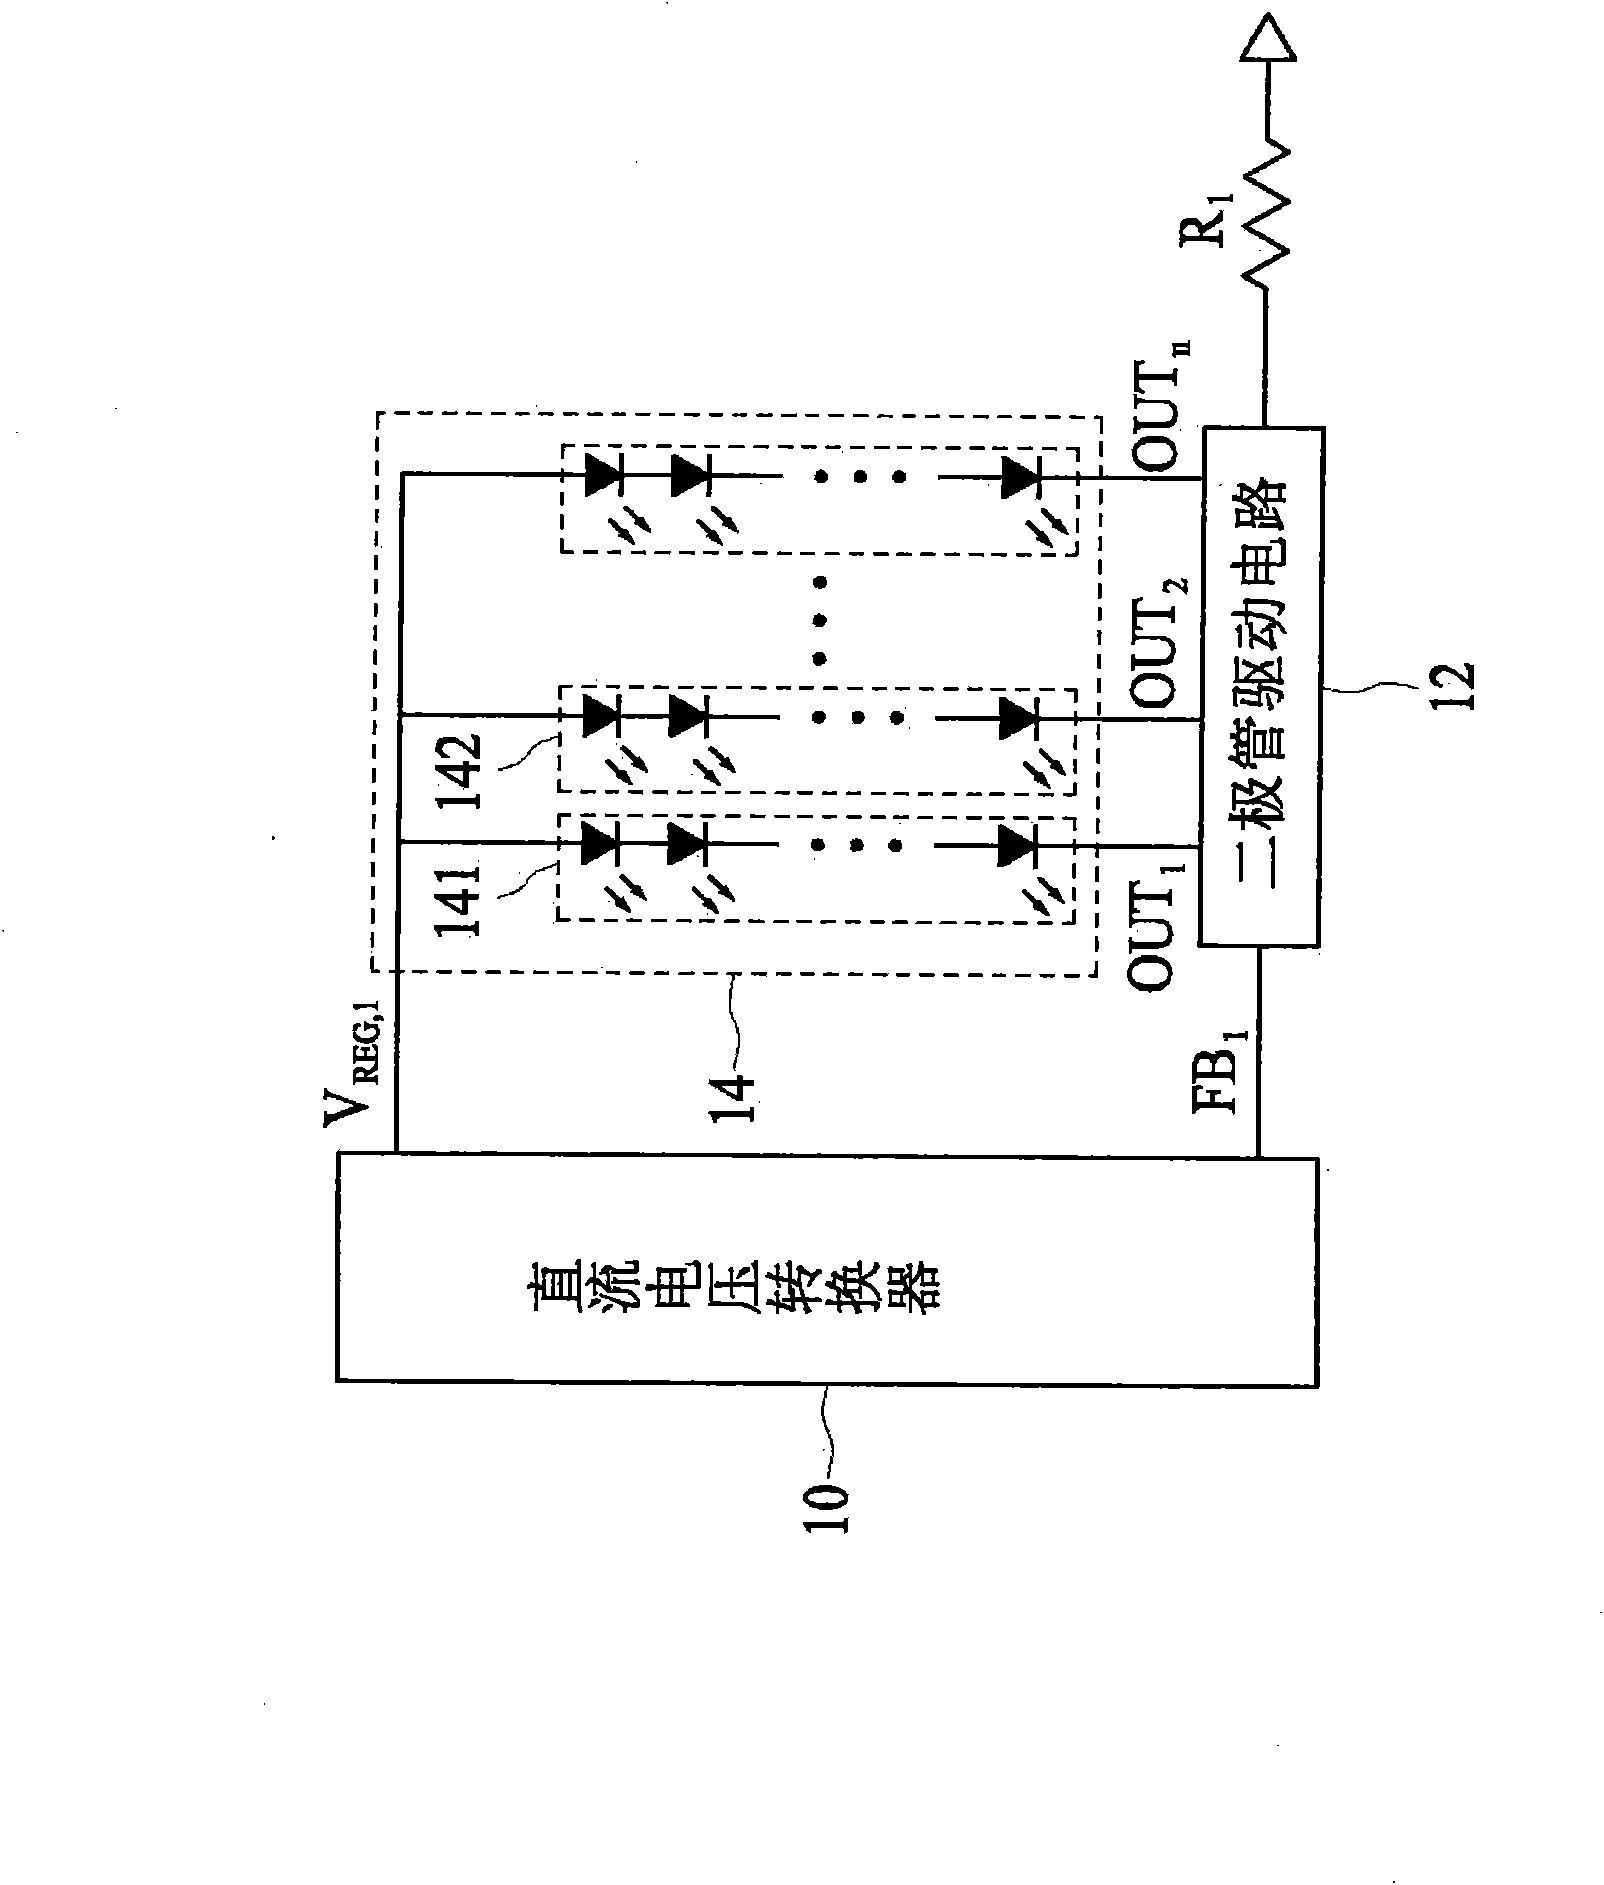 Light-emitting diode driving system and circuit thereof